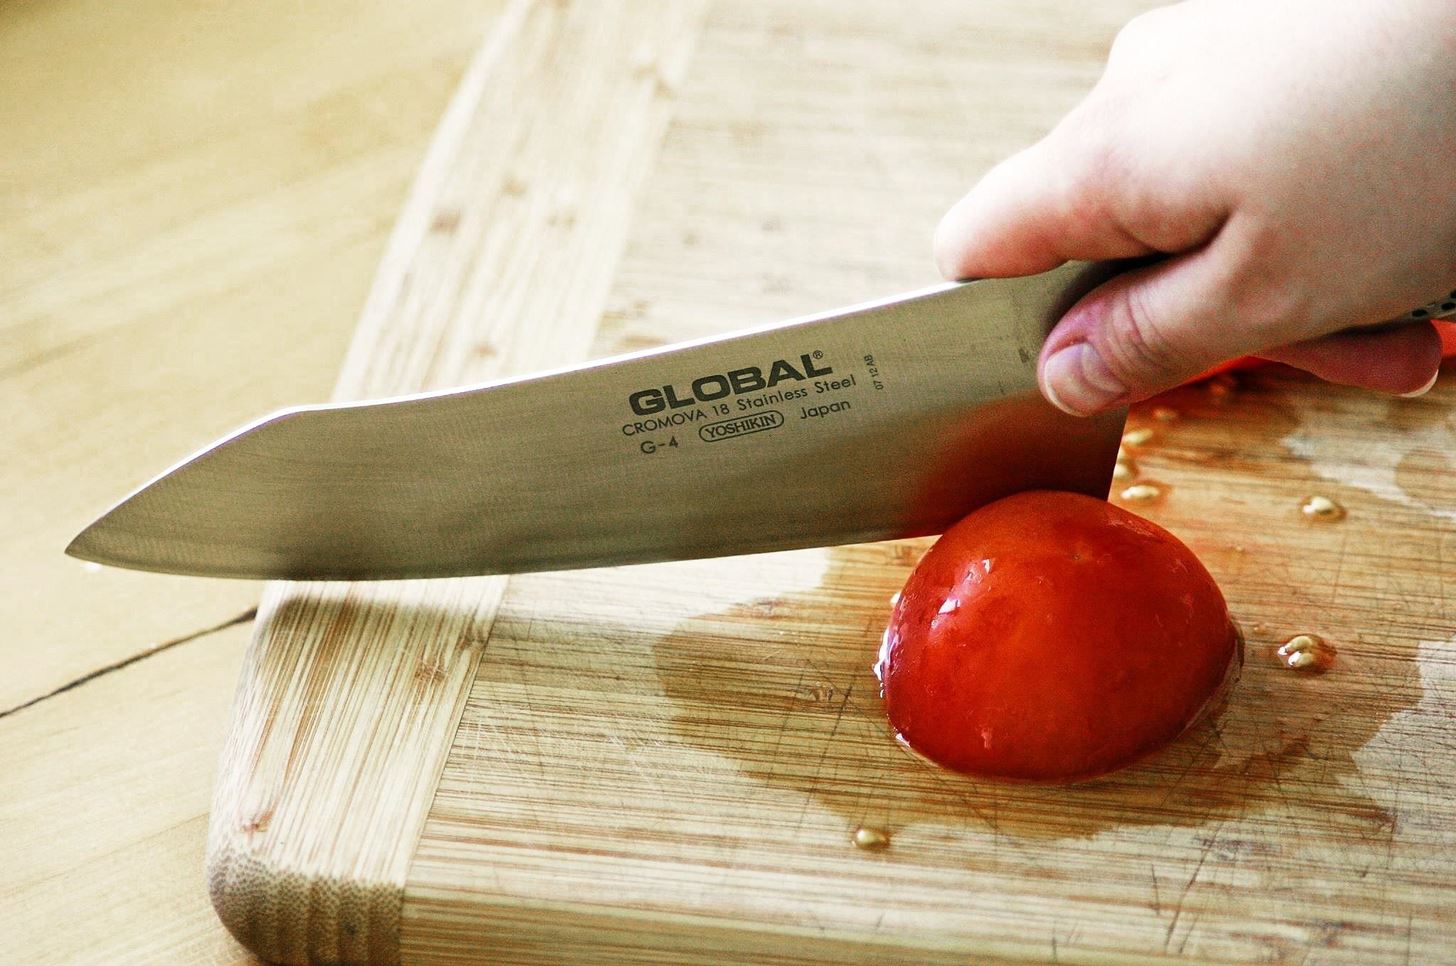 How to Cut Tomatoes the Right Way